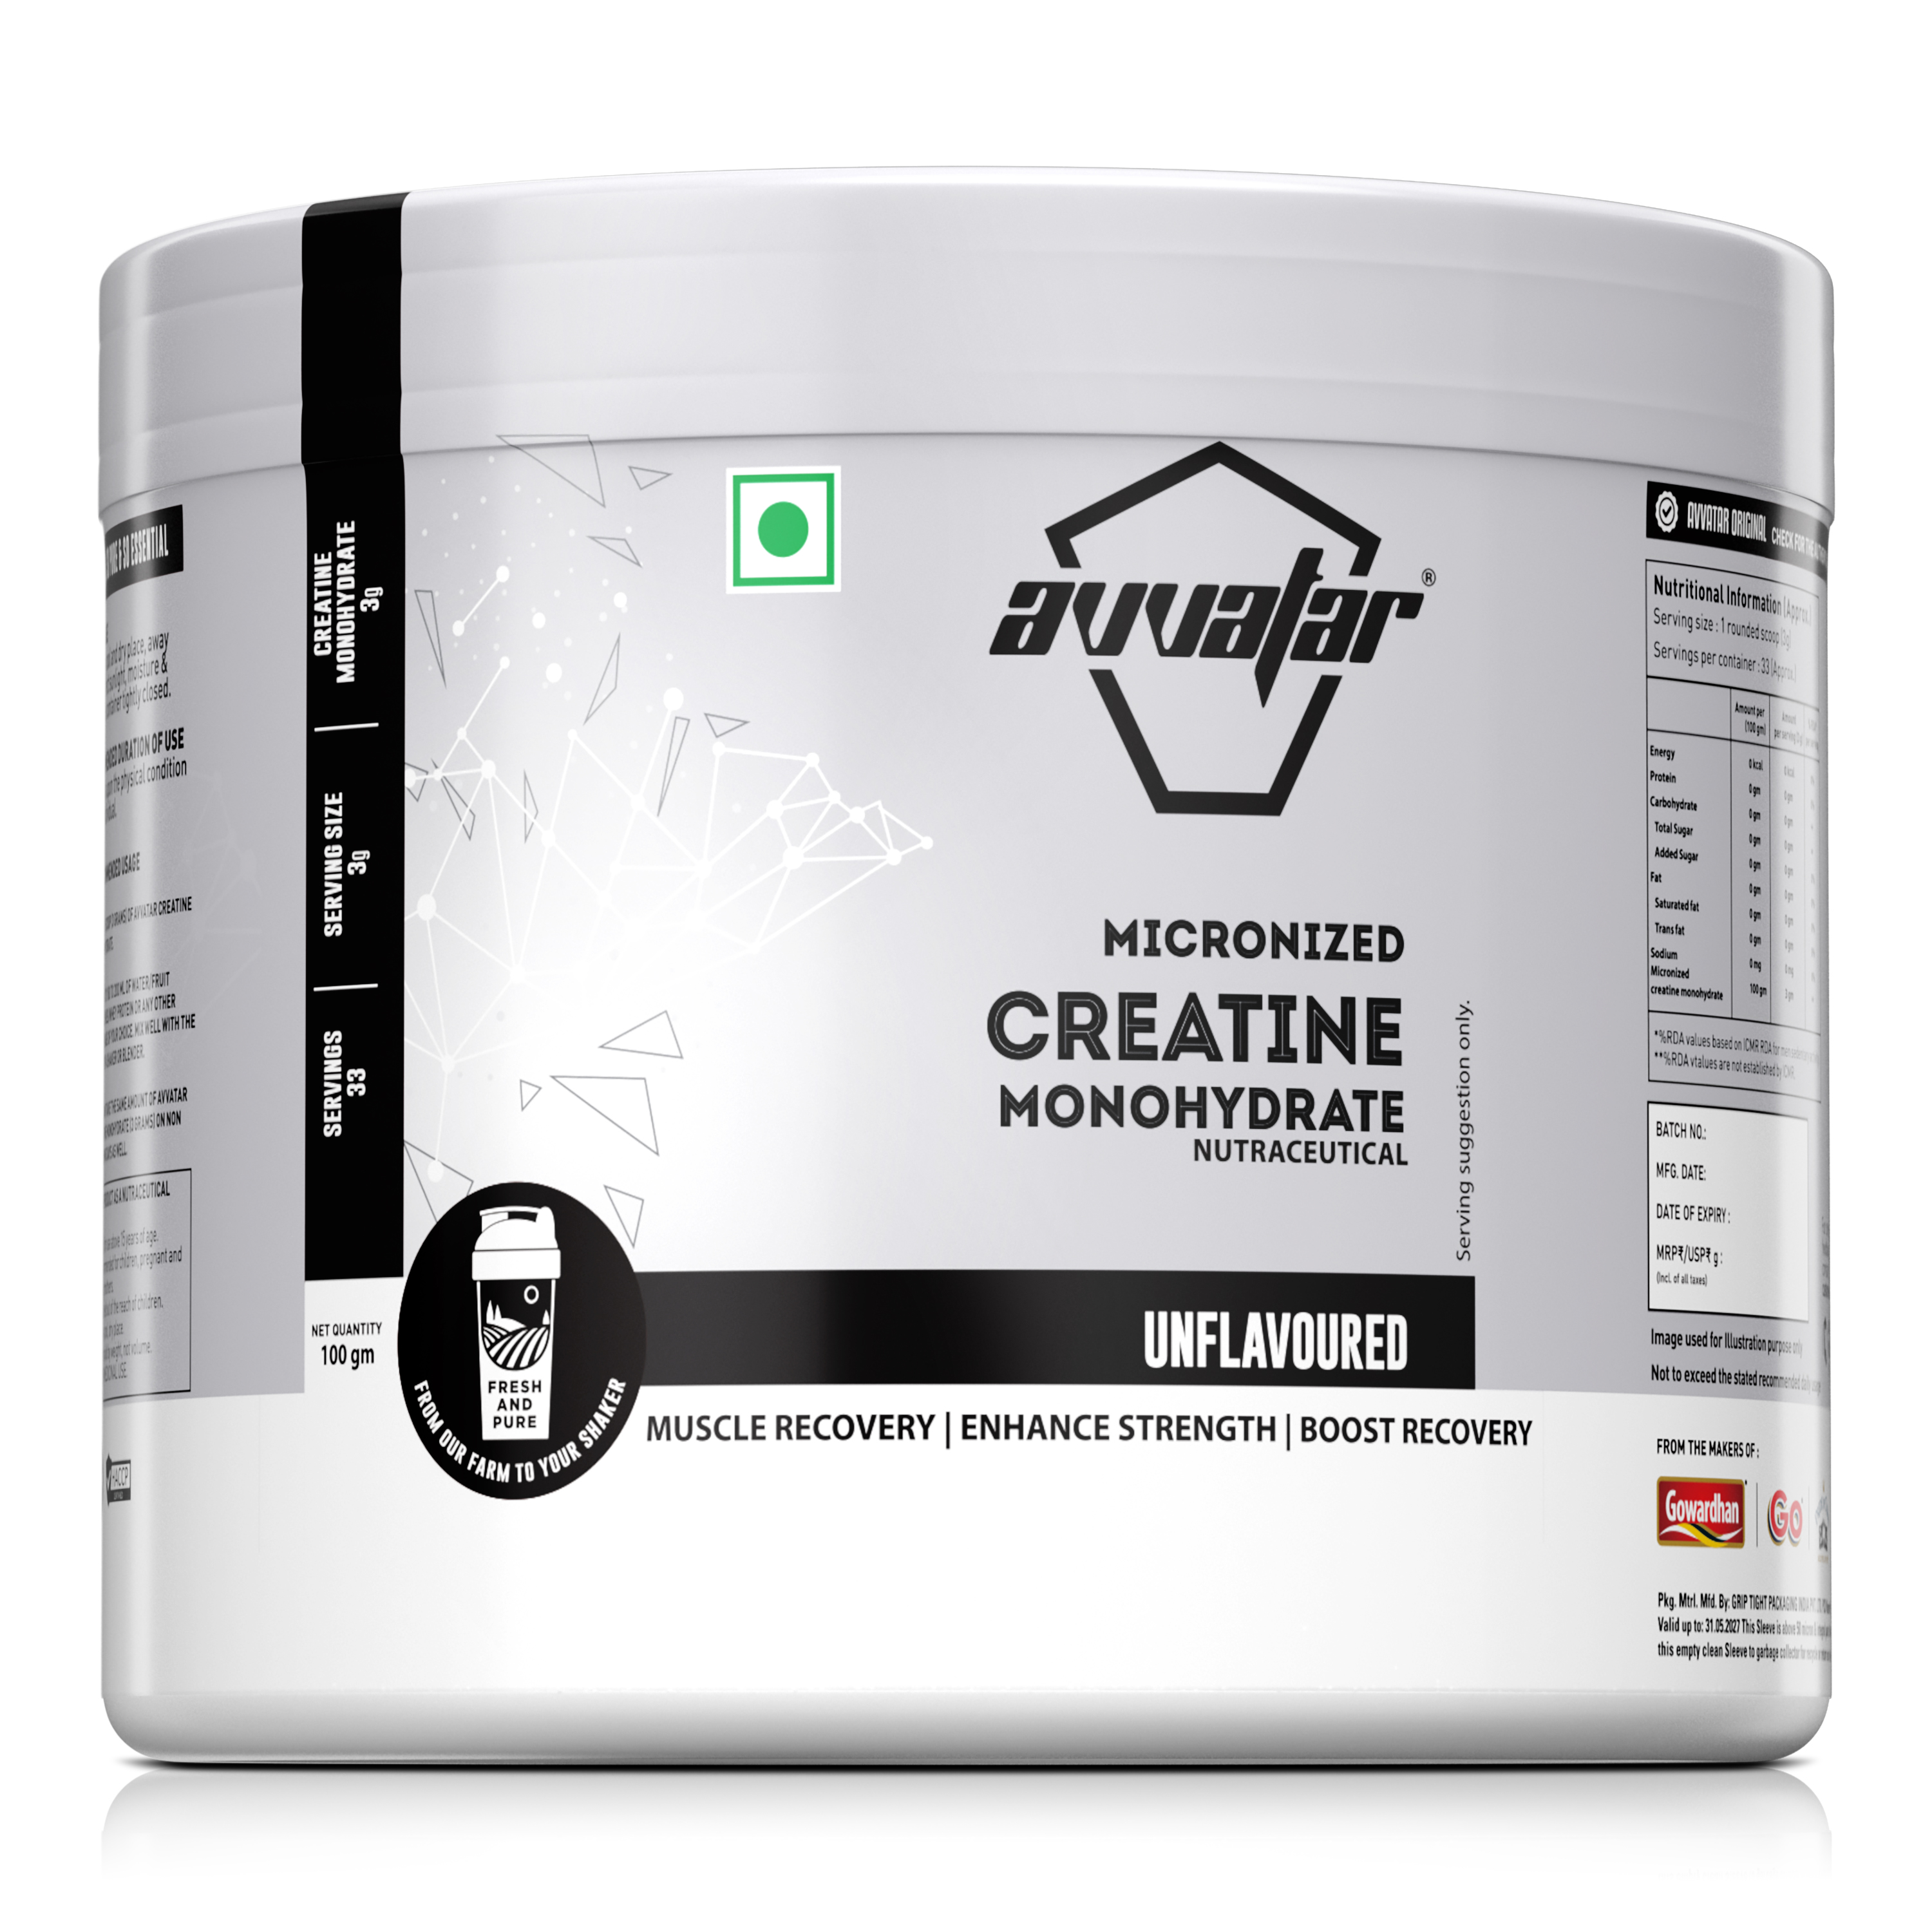 Micronized for Rapid Absorption: Our creatine monohydrate is finely micronized, ensuring quick absorption and maximum effectiveness.
33 Servings per Container: Each 100g container provides a total of 33 servings, offering excellent value for your muscle-building needs.
Pure and Potent: Avvatar Creatine Monohydrate is of the highest quality, free from fillers and additives, supporting your fitness goals without compromise.
Enhanced Strength and Endurance: Fuel your workouts with the power of creatine, promoting increased strength, endurance, and overall athletic performance
Versatile Use: Suitable for various fitness goals, including muscle building, strength training, and high-intensity workouts.
Easy to Mix: Our micronized powder dissolves easily in water or your favorite beverage, making it convenient to incorporate into your daily routine.
Lab Tested for Purity: Avvatar products undergo rigorous testing to ensure the highest standards of purity and quality.